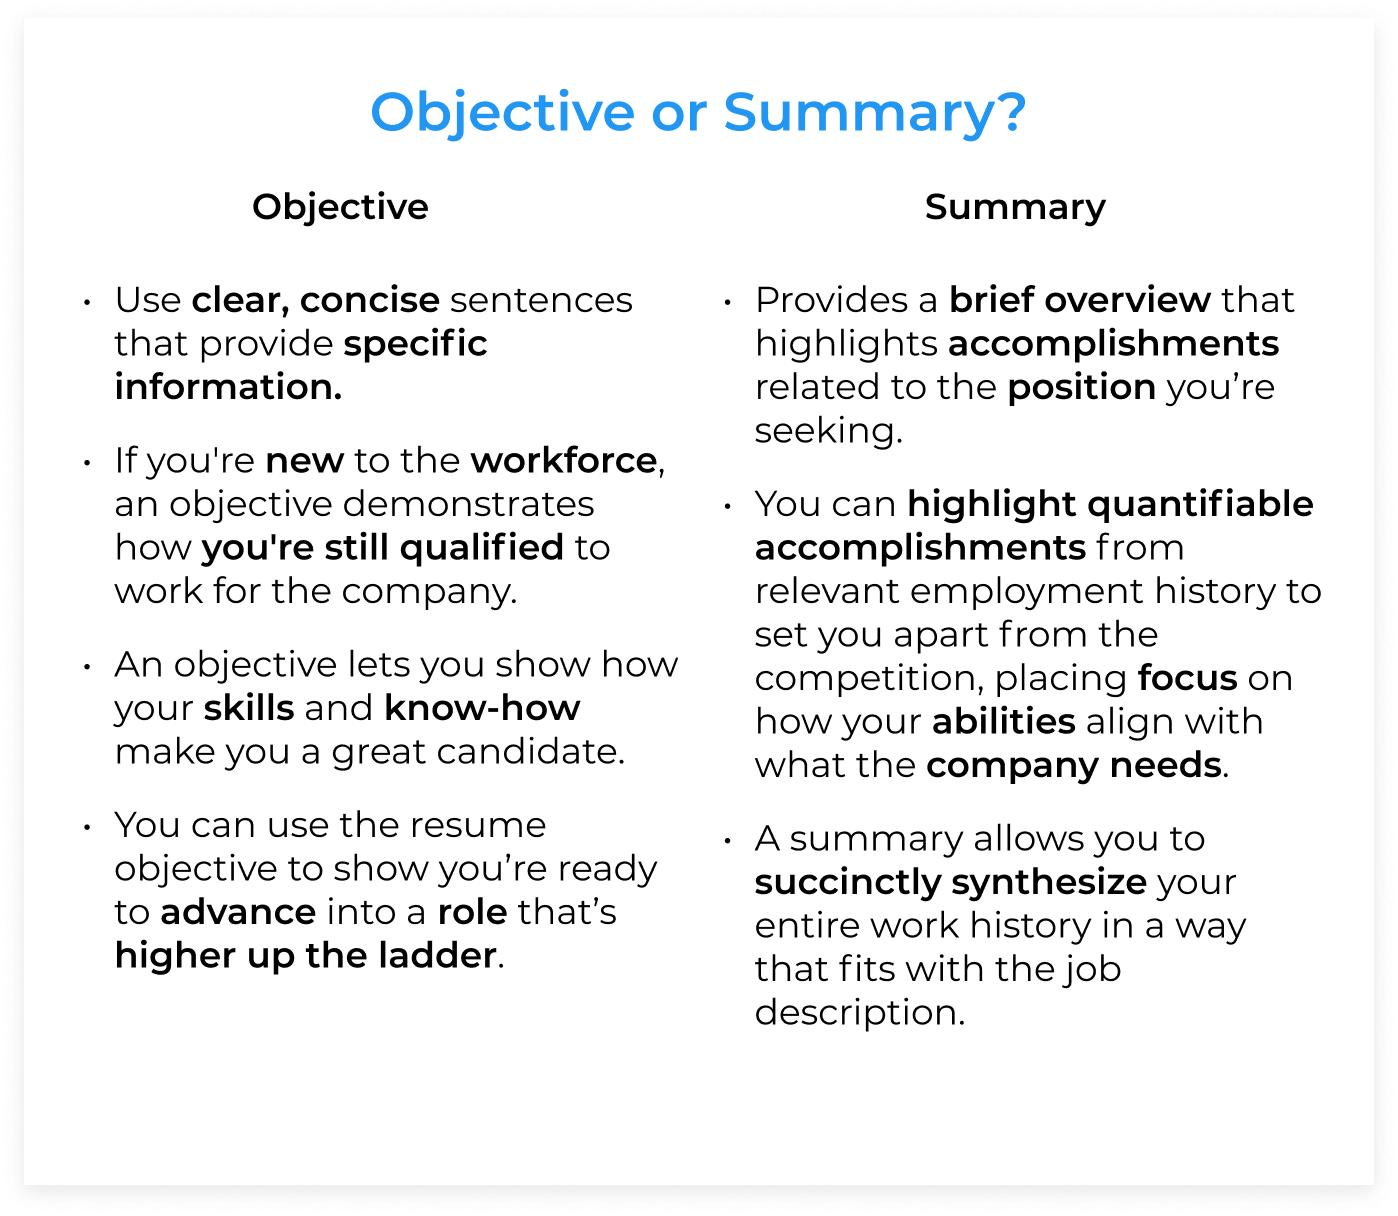 Chart of differences in resume objectives and summaries